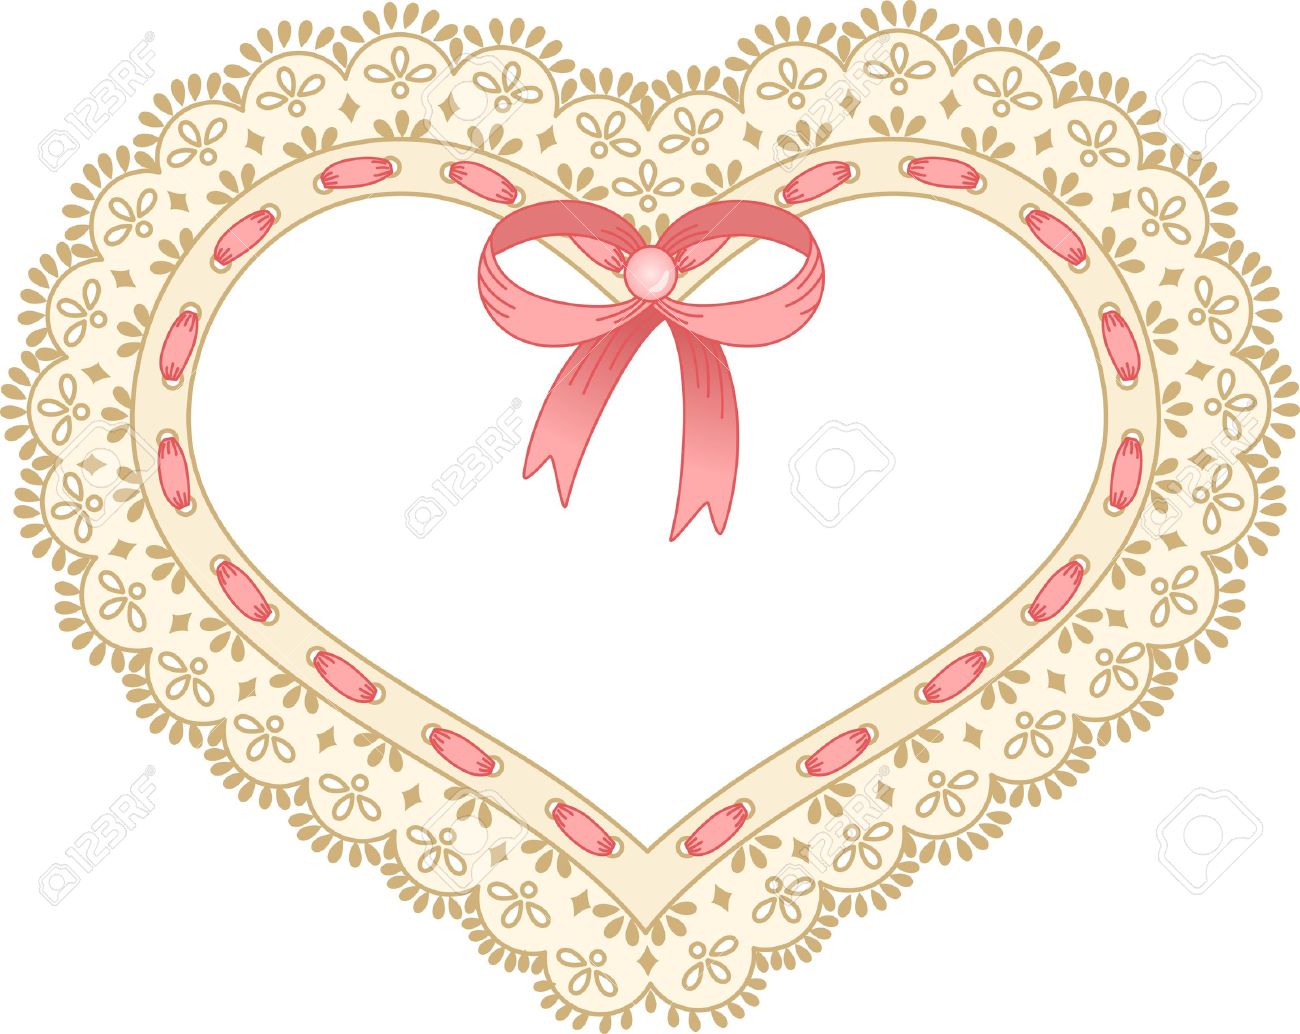 Lace heart clipart.